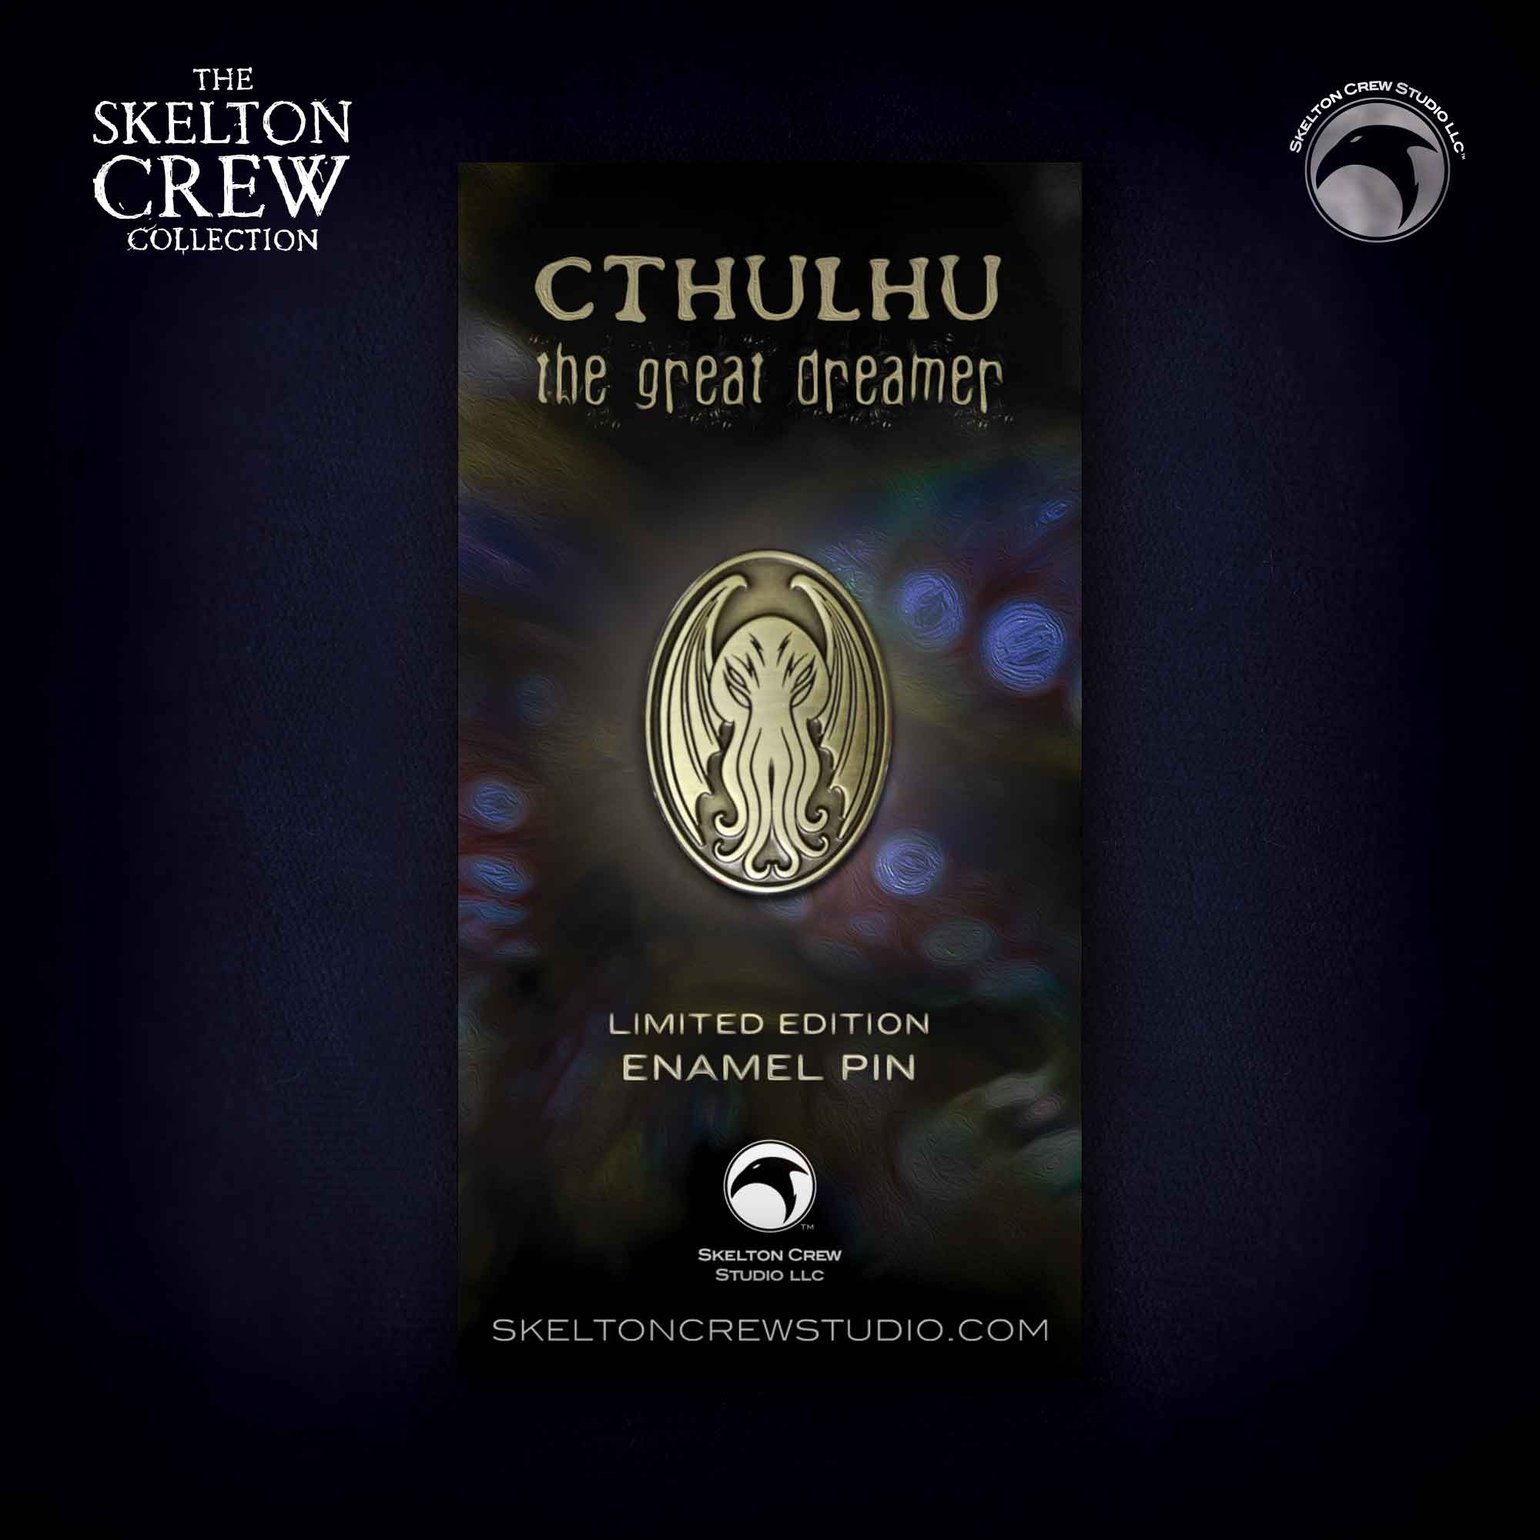 Image of The Skelton Crew Collection: Limited Edition Cthulhu pin!